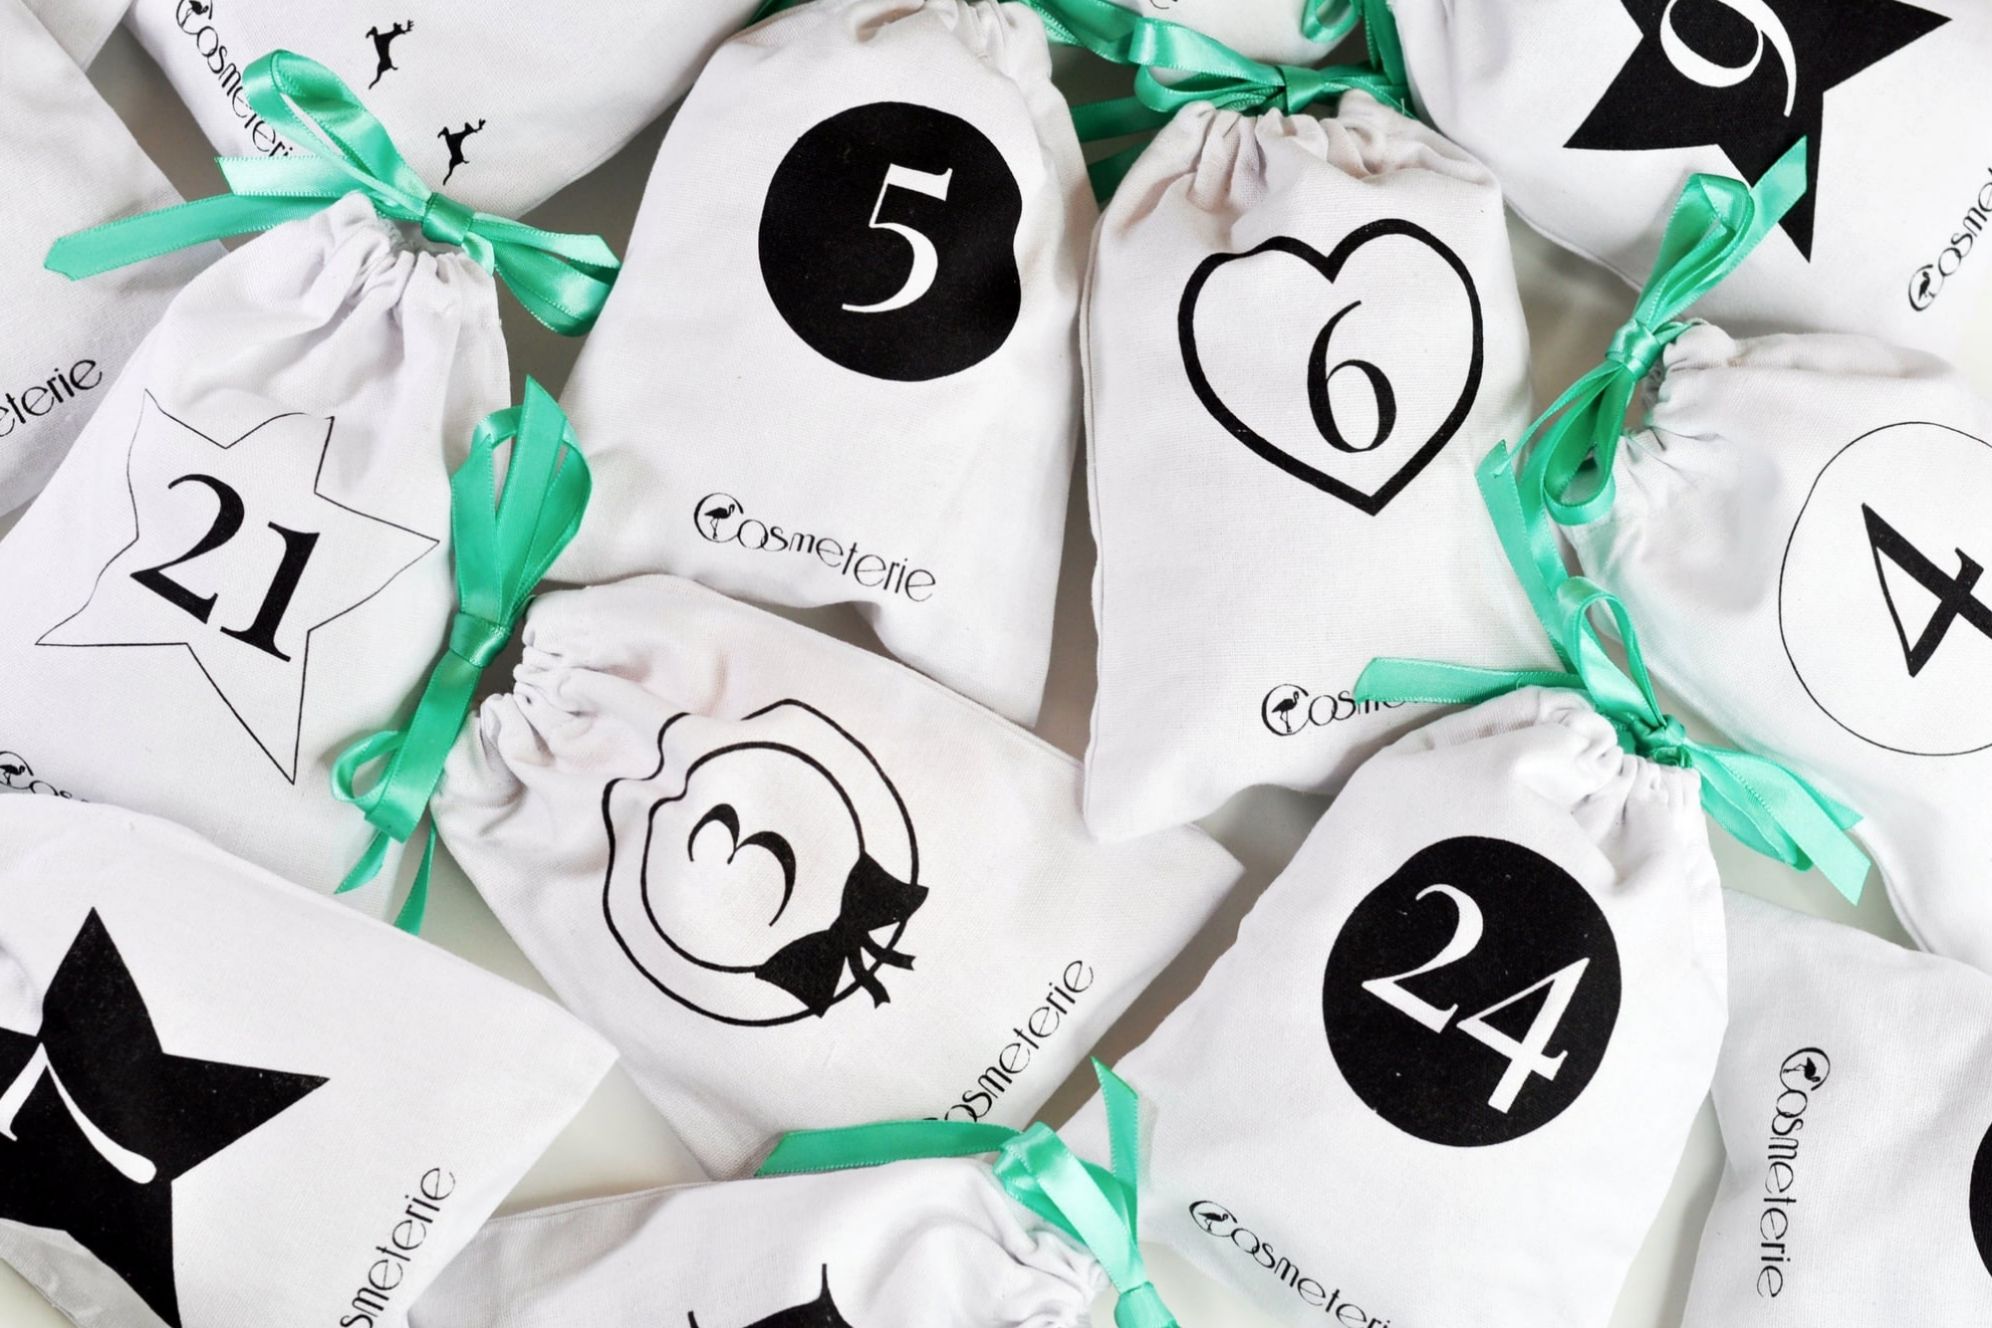 Exclusive & Limited: The Cosmeterie Advent Calendar 